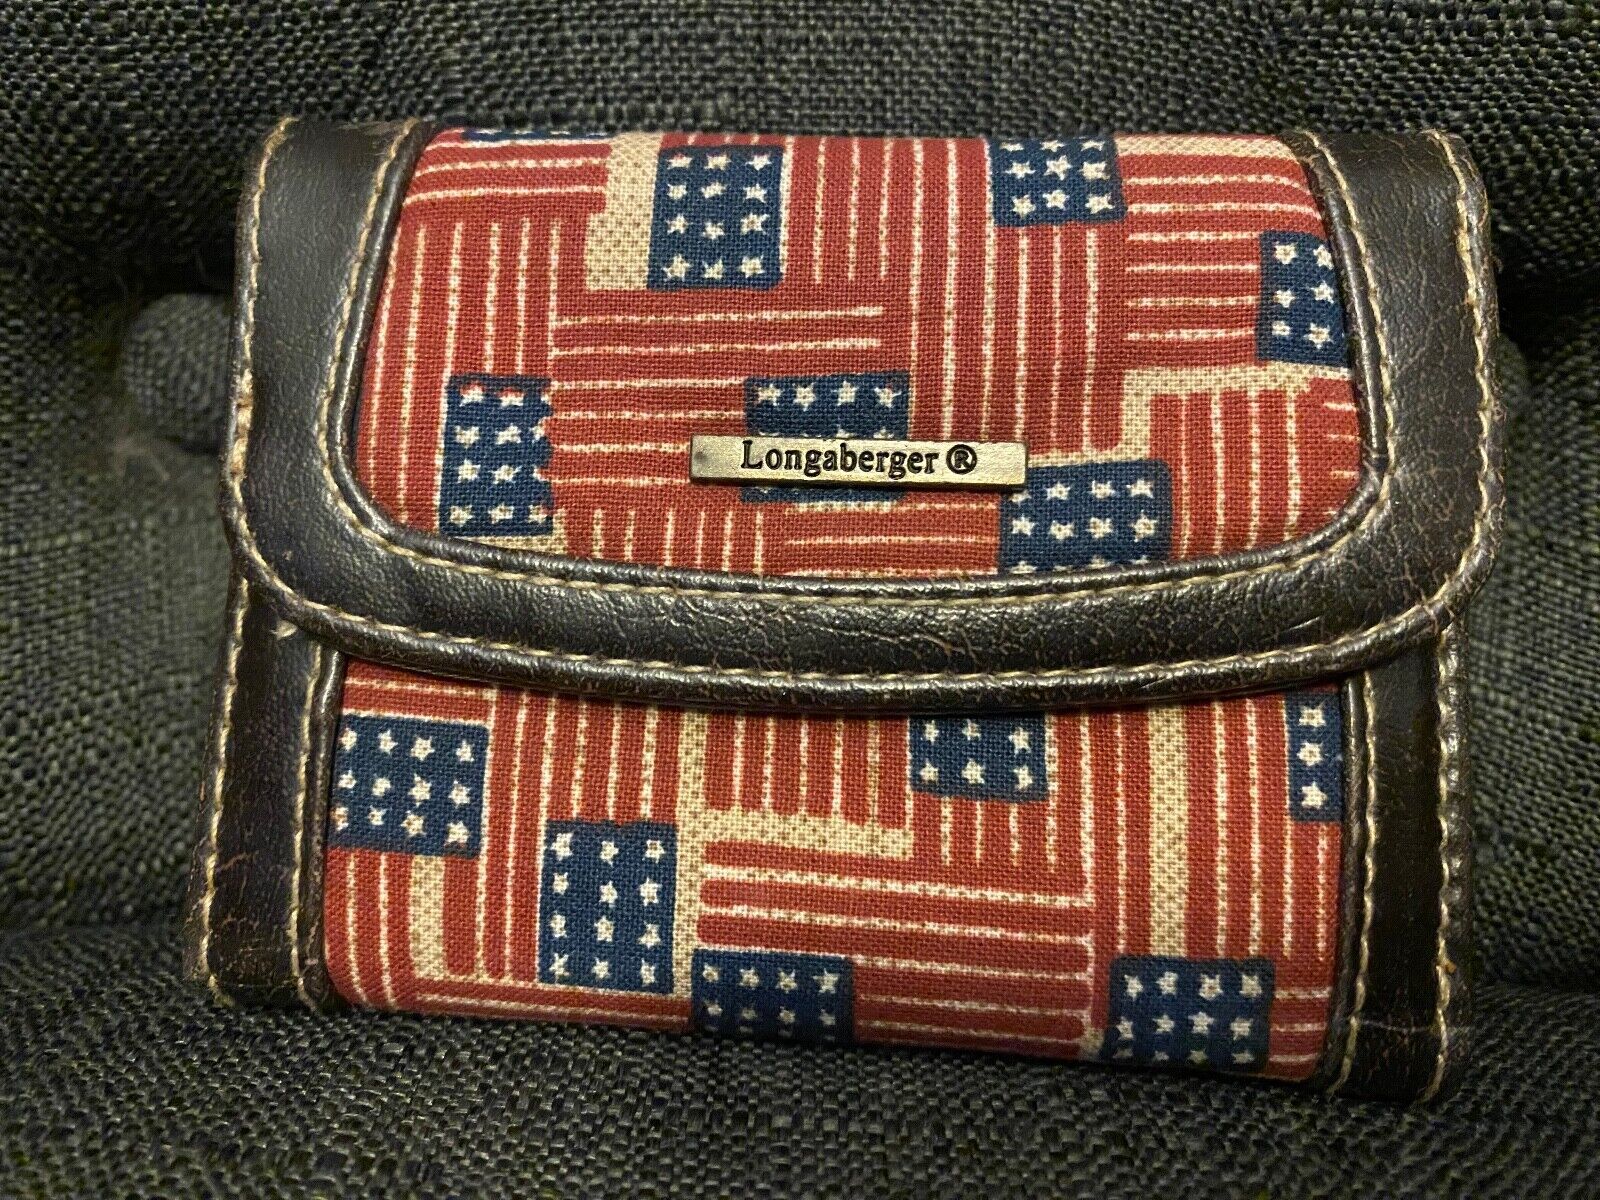 Longaberger Homestead Old Glory American Flag Wallet New Old Stock See Pictures